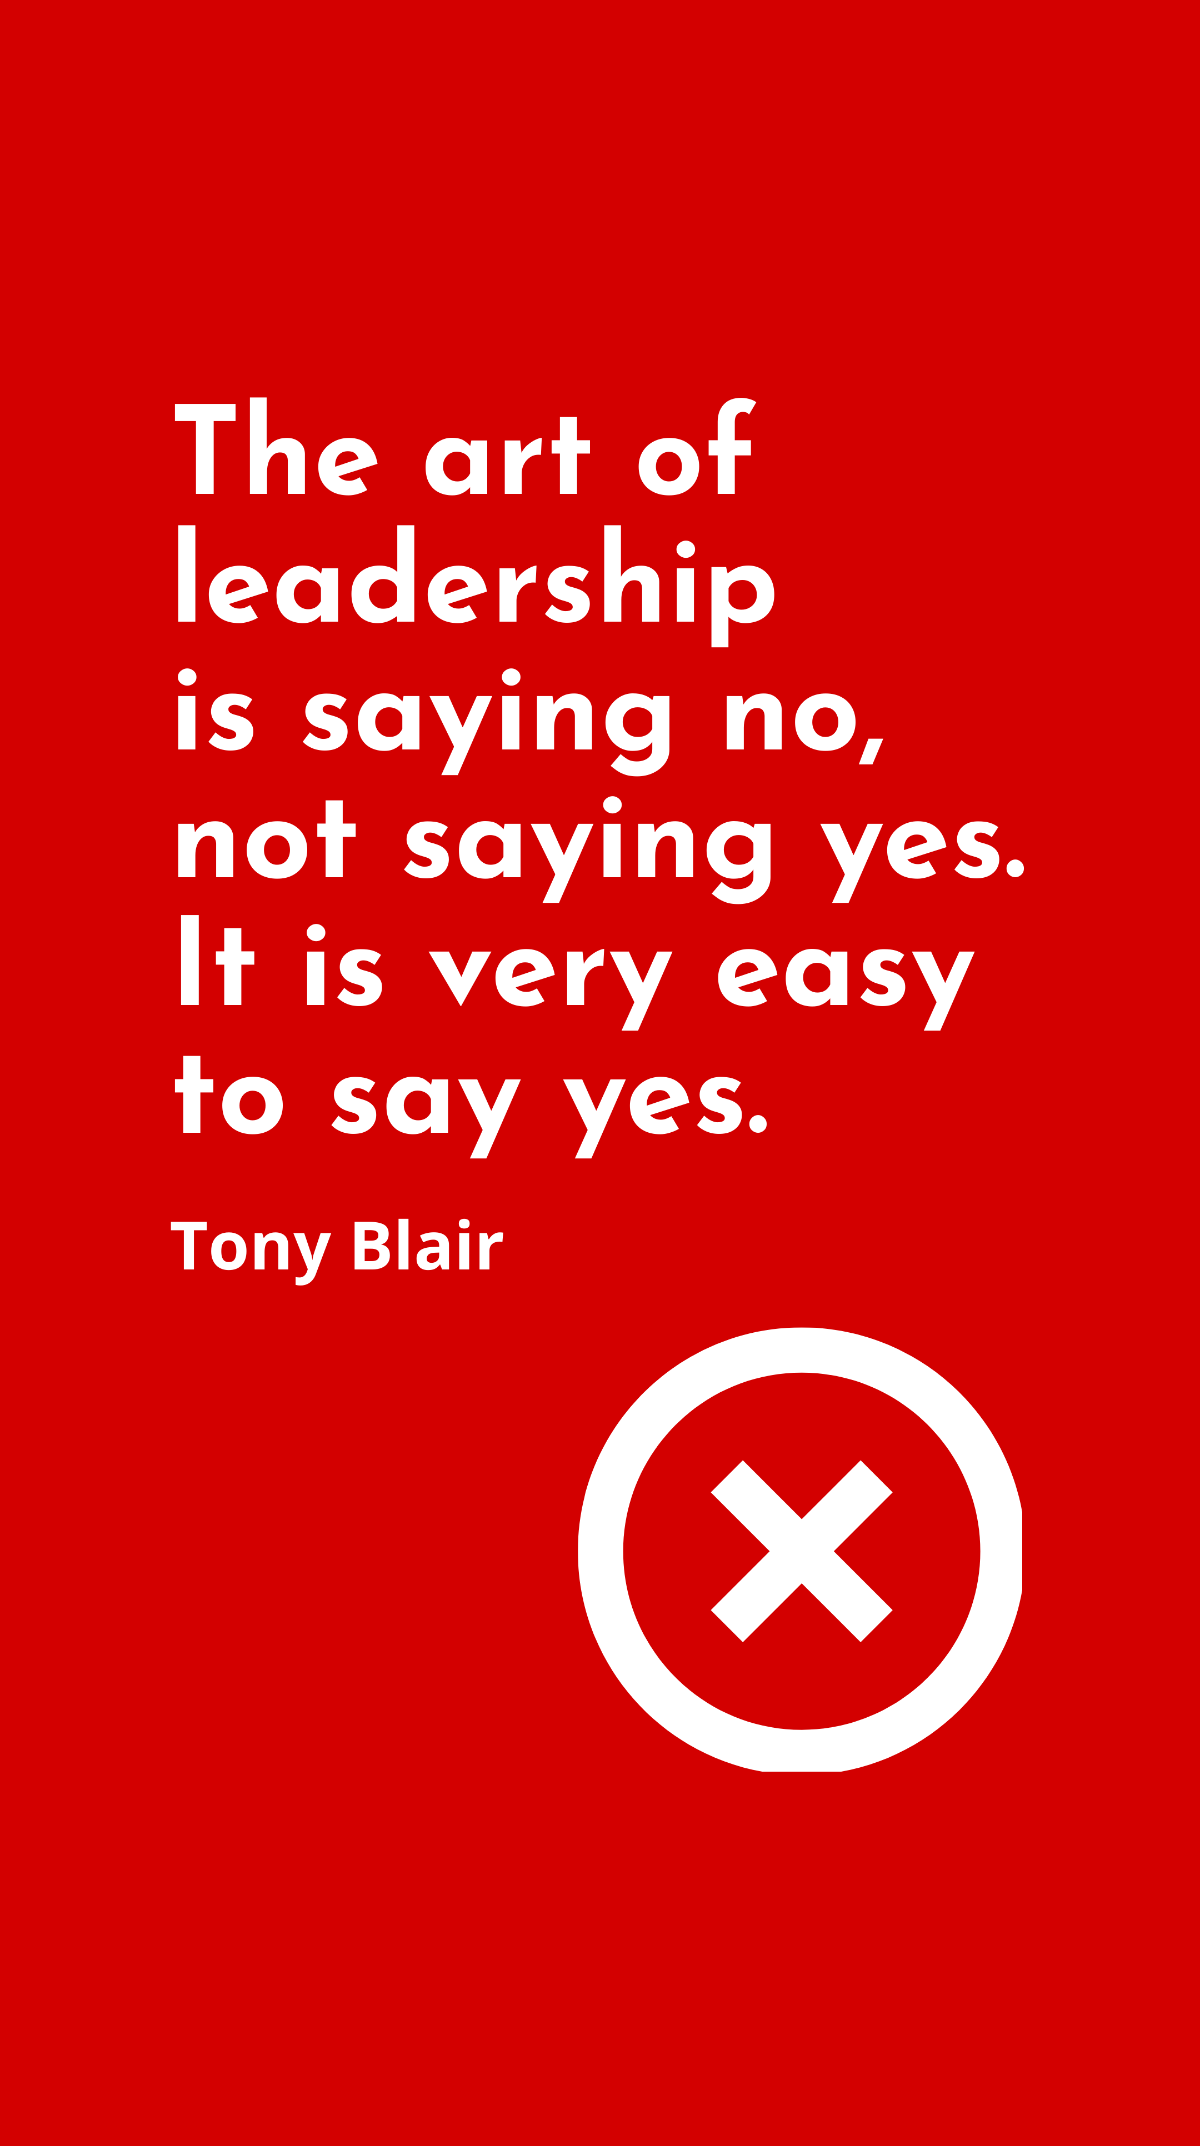 Tony Blair - The art of leadership is saying no, not saying yes. It is very easy to say yes. Template